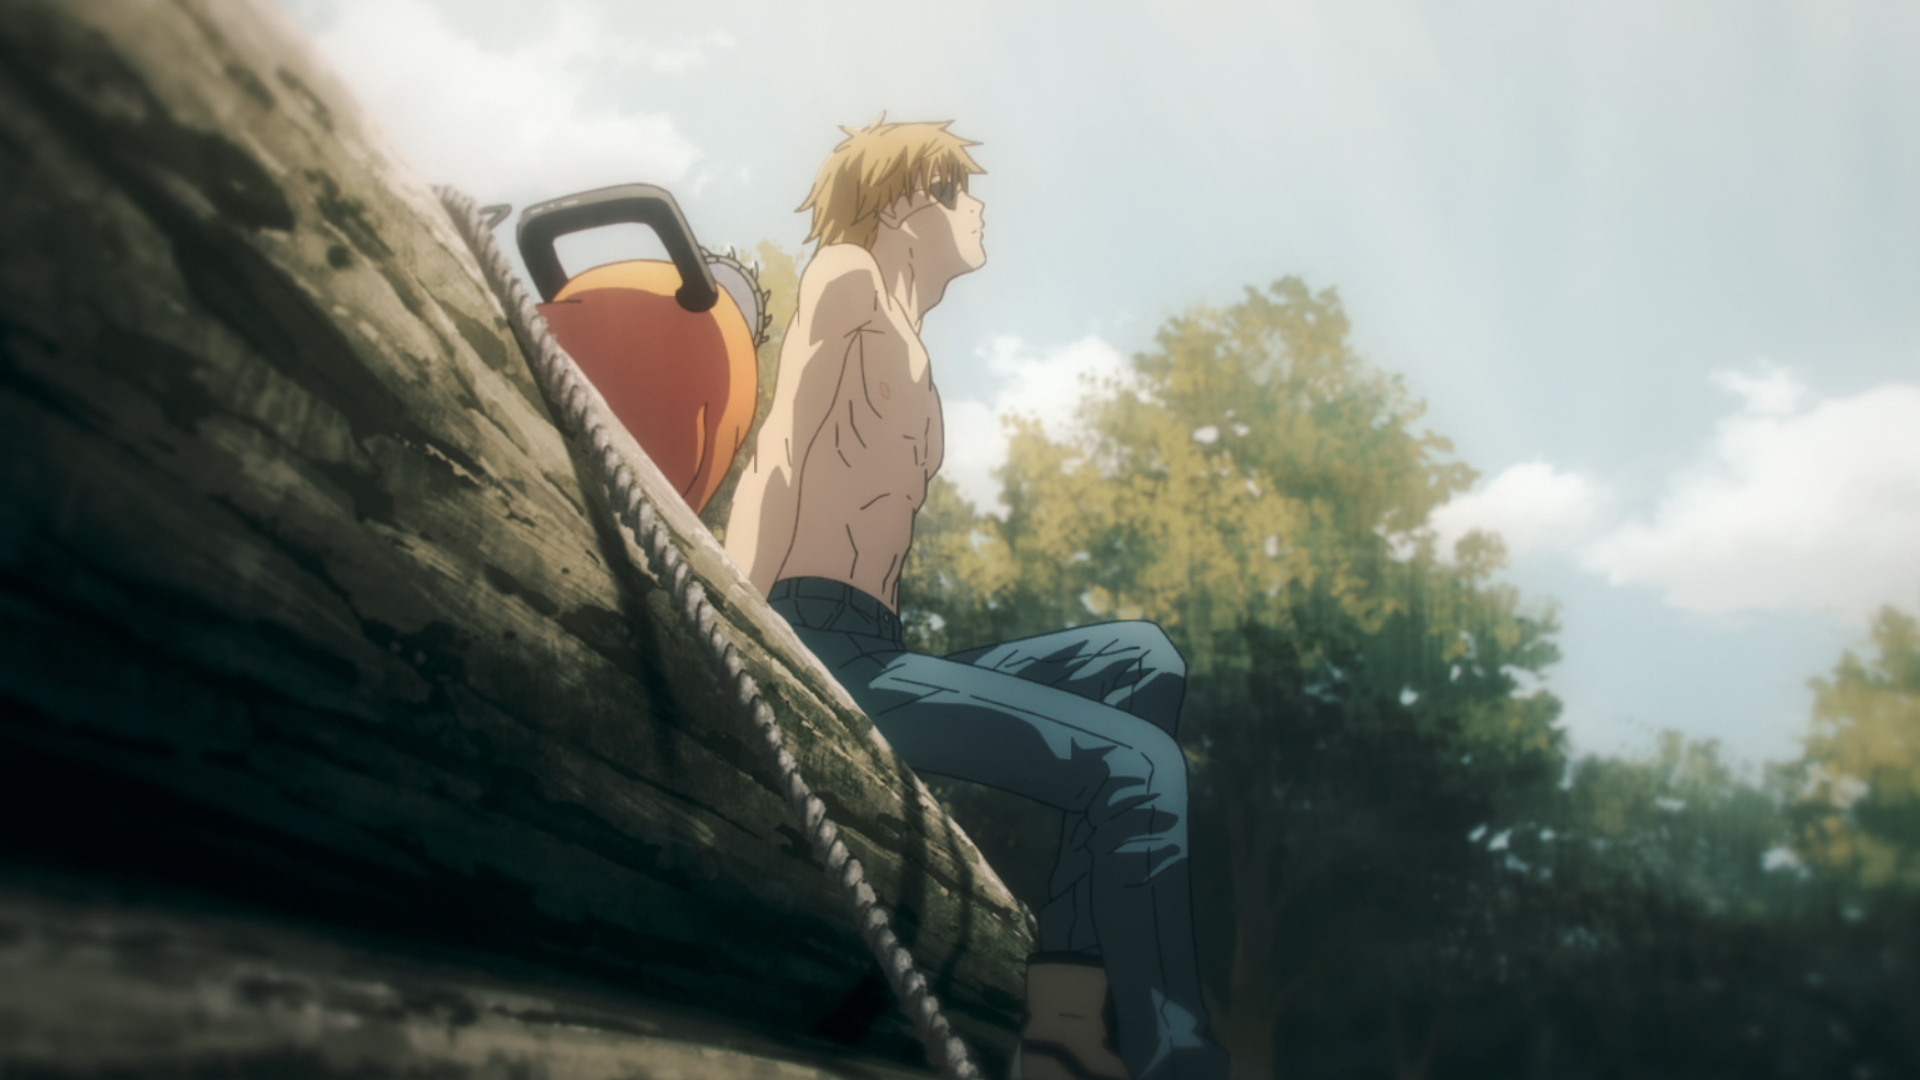 Chainsaw Man Episode 1 Preview Released - Anime Corner